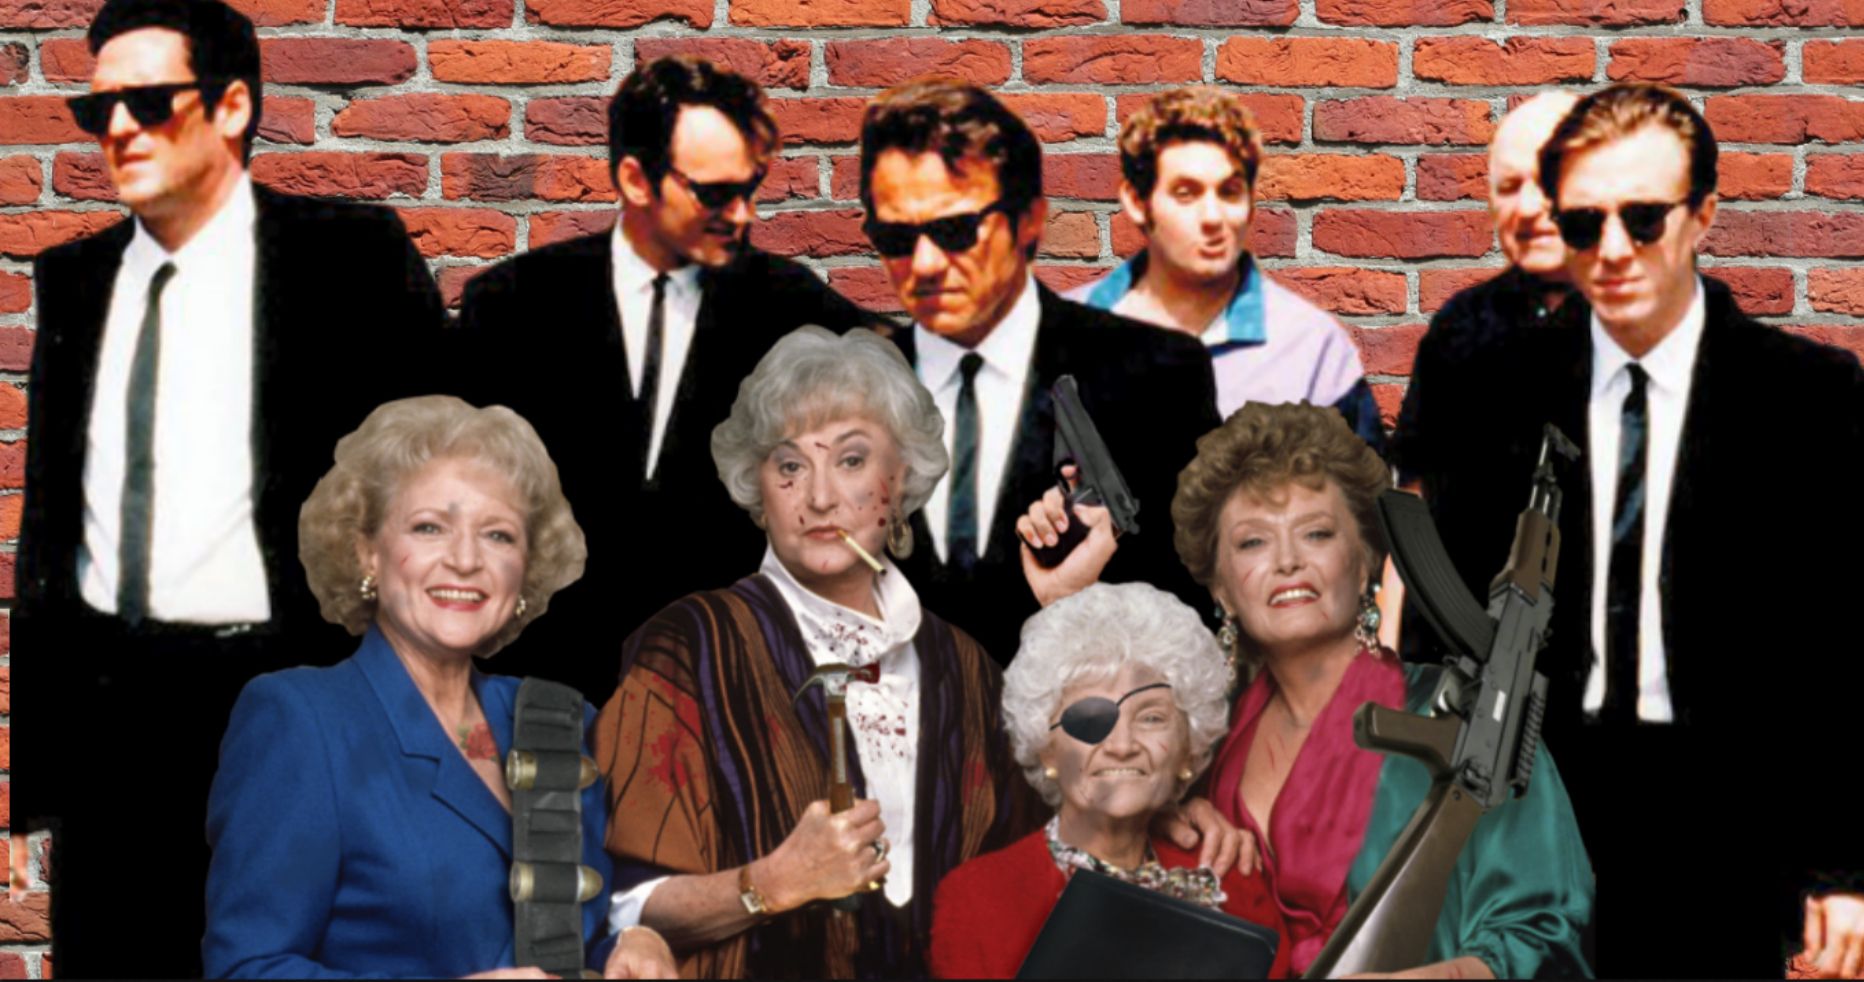 Reservoir Dogs Owes a Lot to The Golden Girls According to Quentin Tarantino